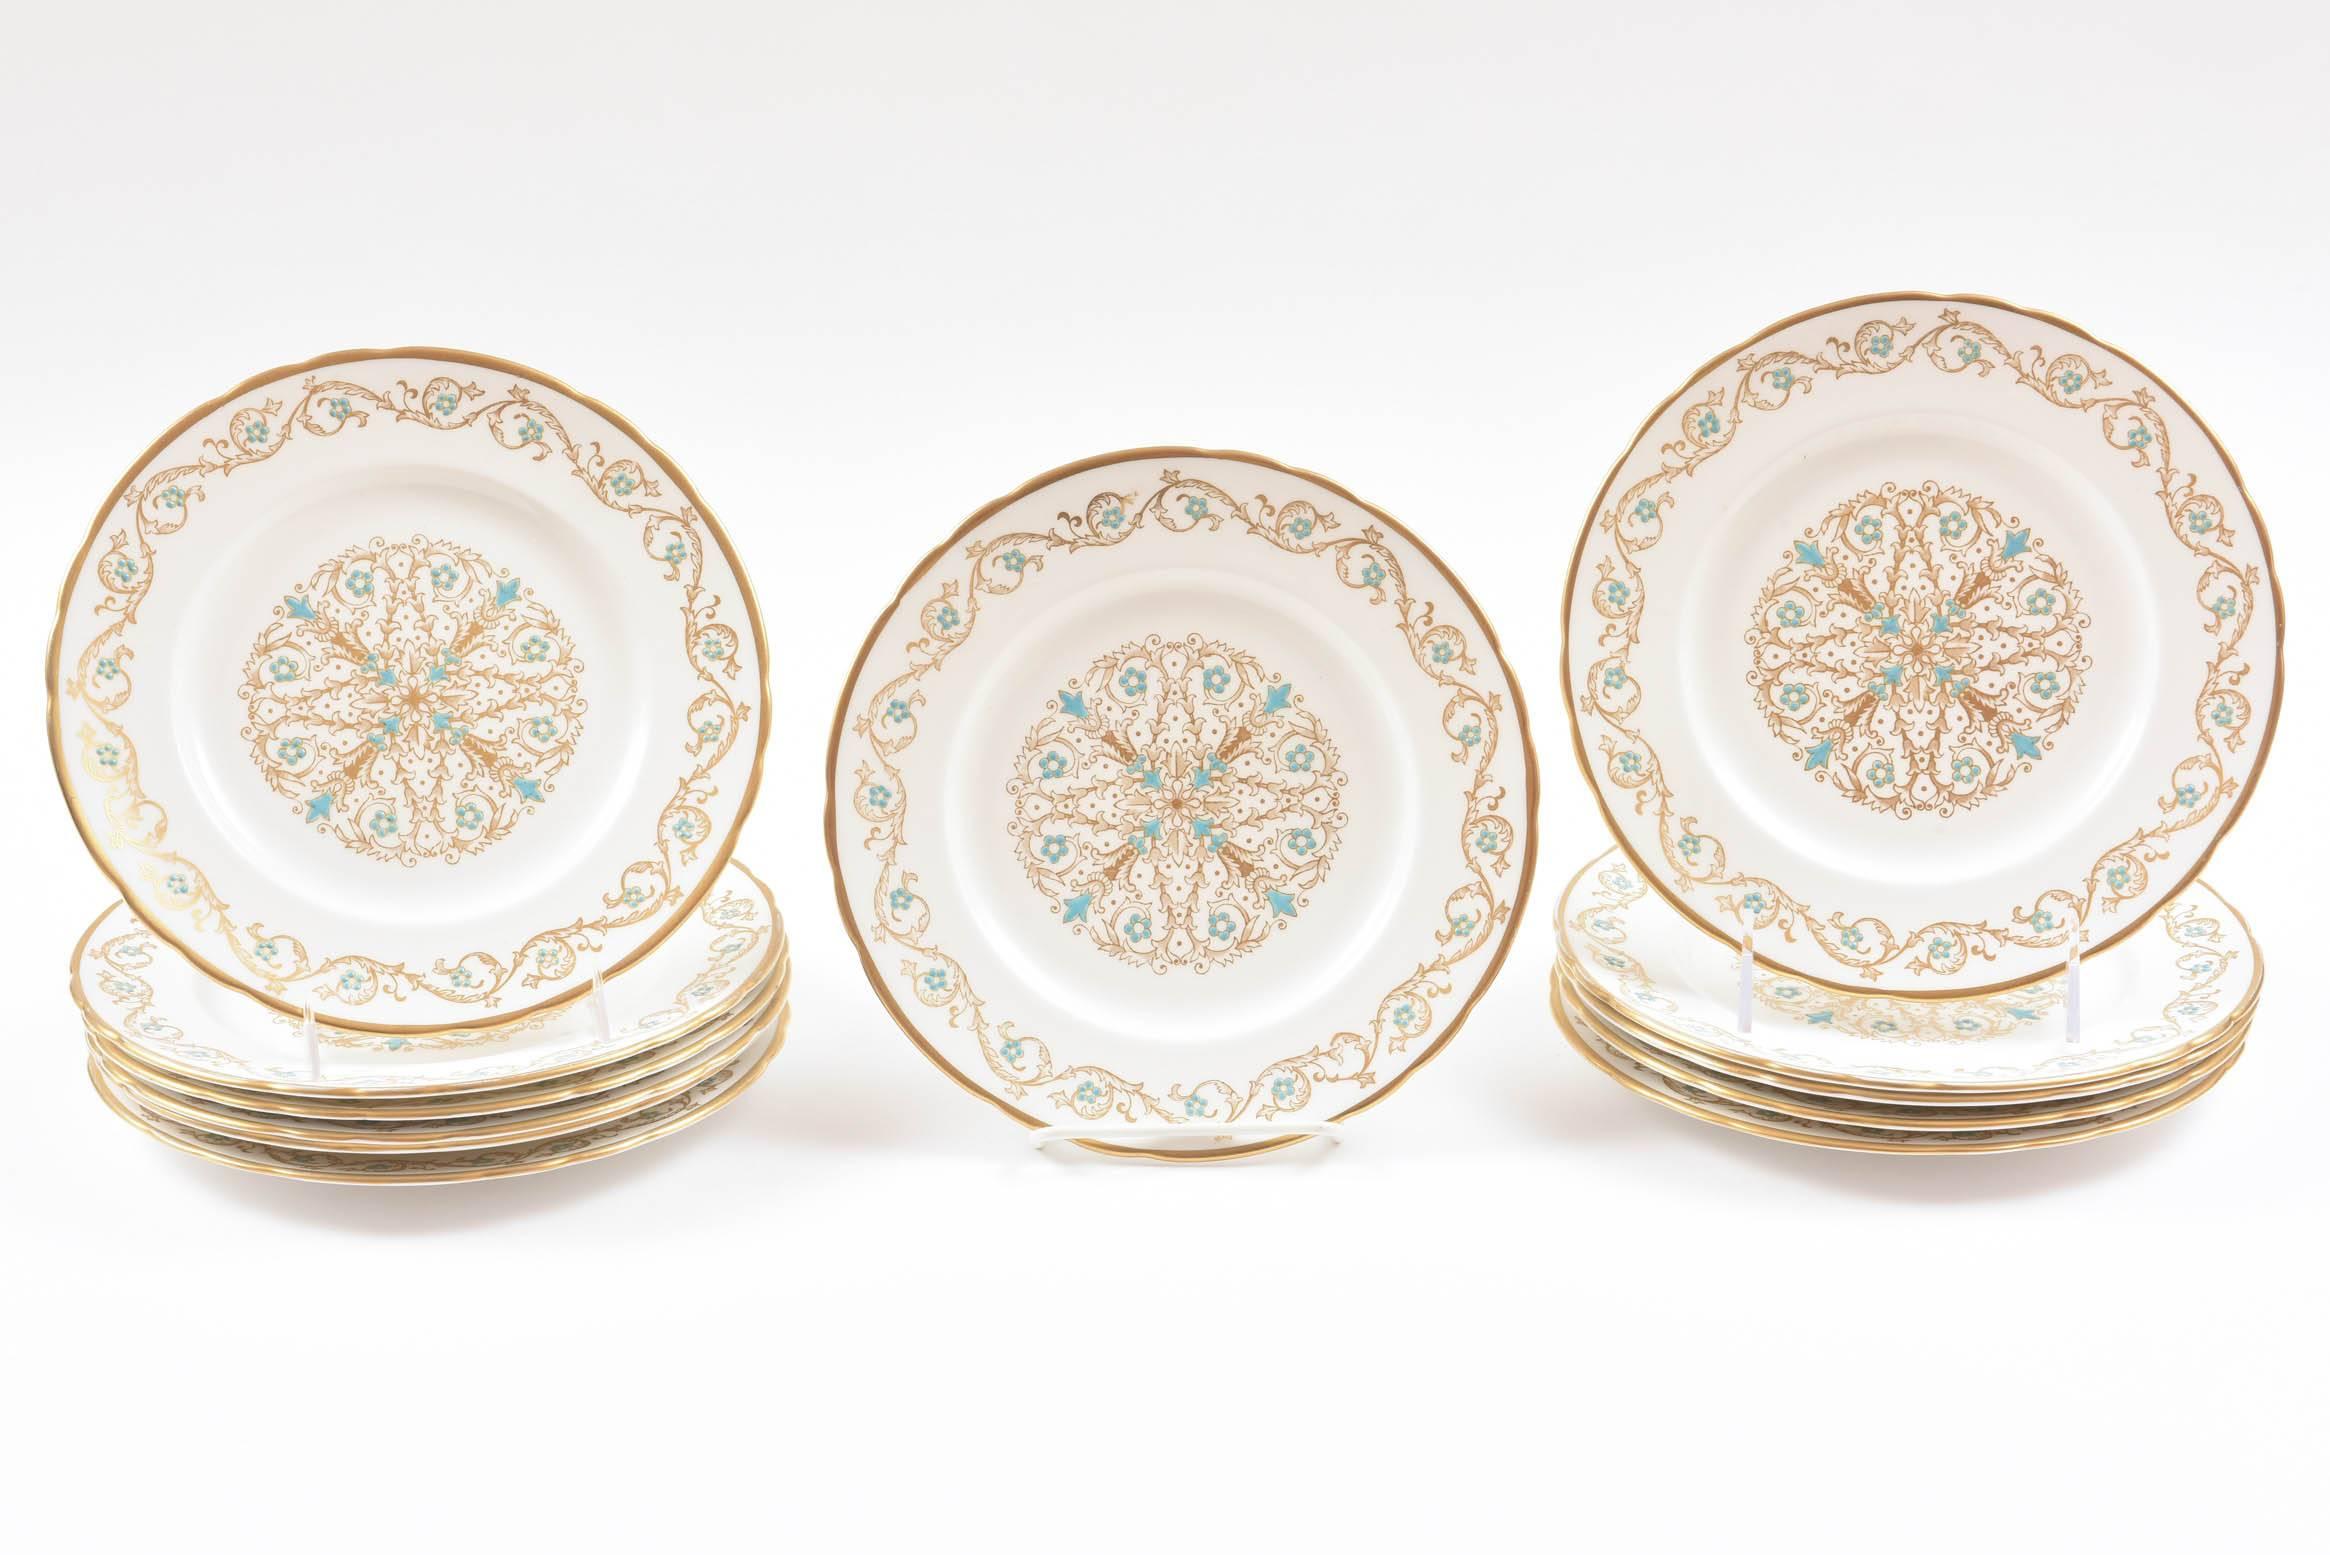 A sweet set of dessert plates with an all over gilt decoration highlighted with hand raised turquoise enamel. A slight scallop to the shape and it's the size you need over and over again for first course, salad, desserts, etc. In very nice vintage